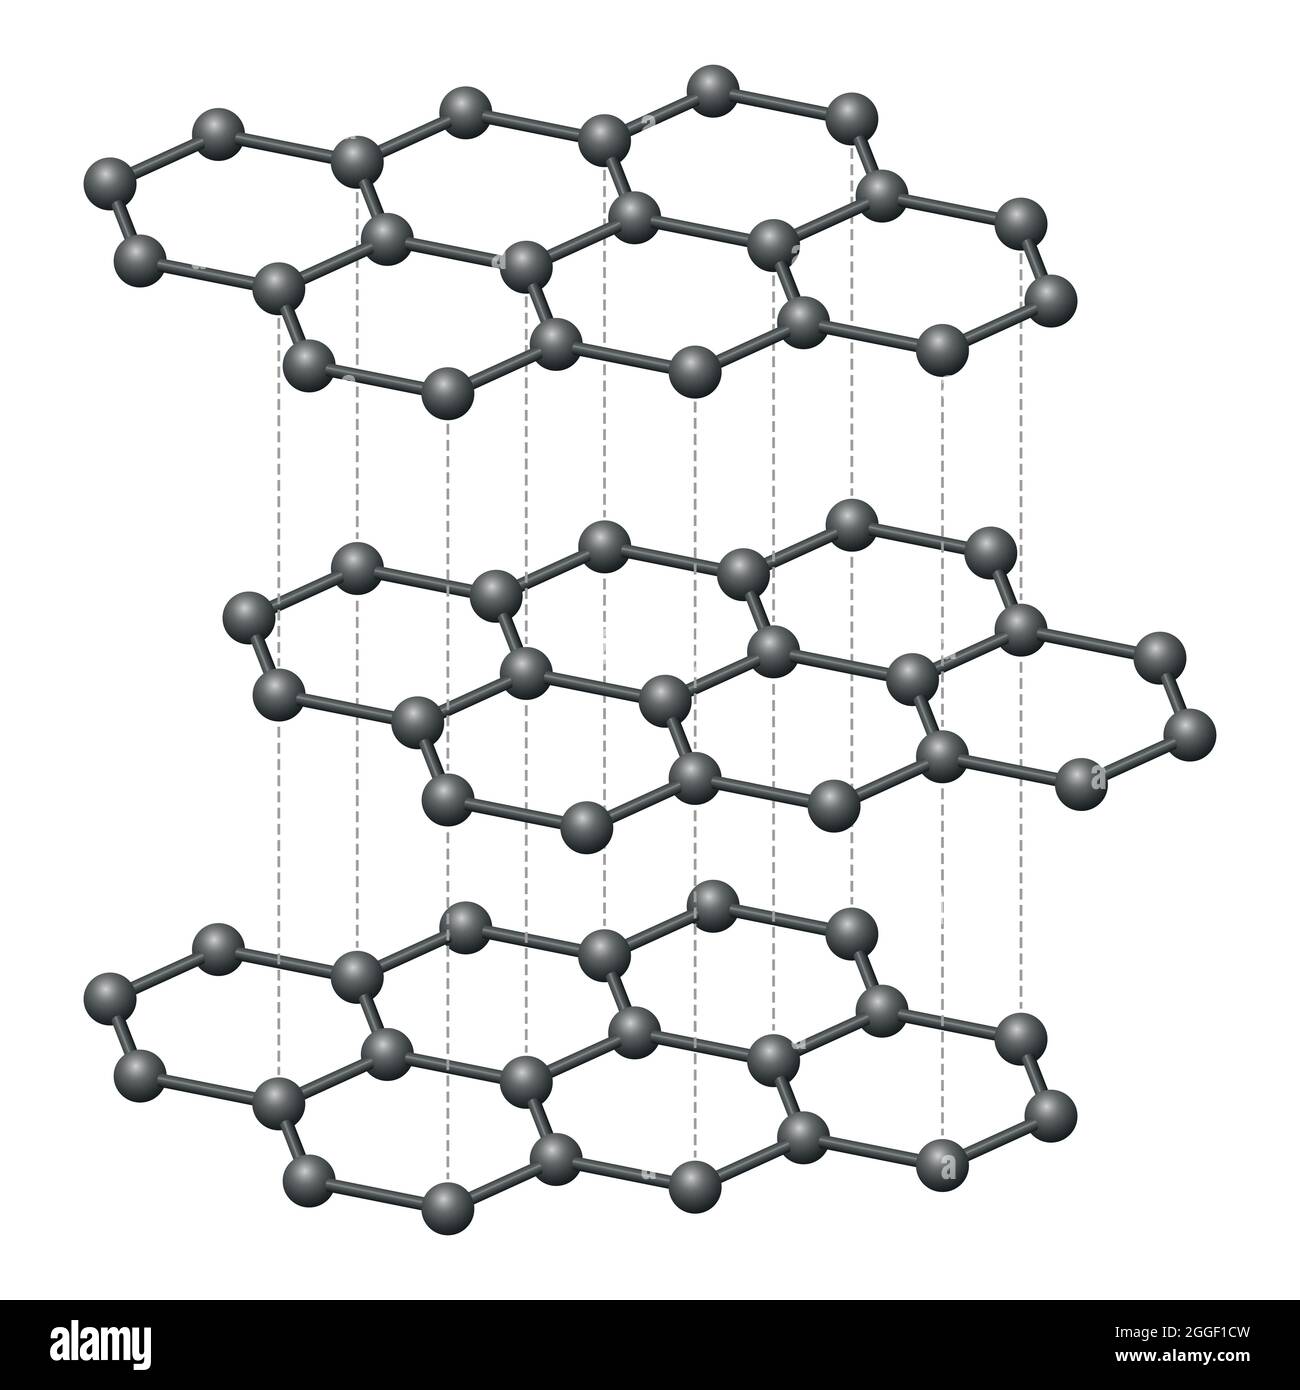 Graphite layers, three-dimensional schematic diagram. Crystalline form of carbon atoms, hexagonally arranged, forming flat honeycomb lattice layers. Stock Photo